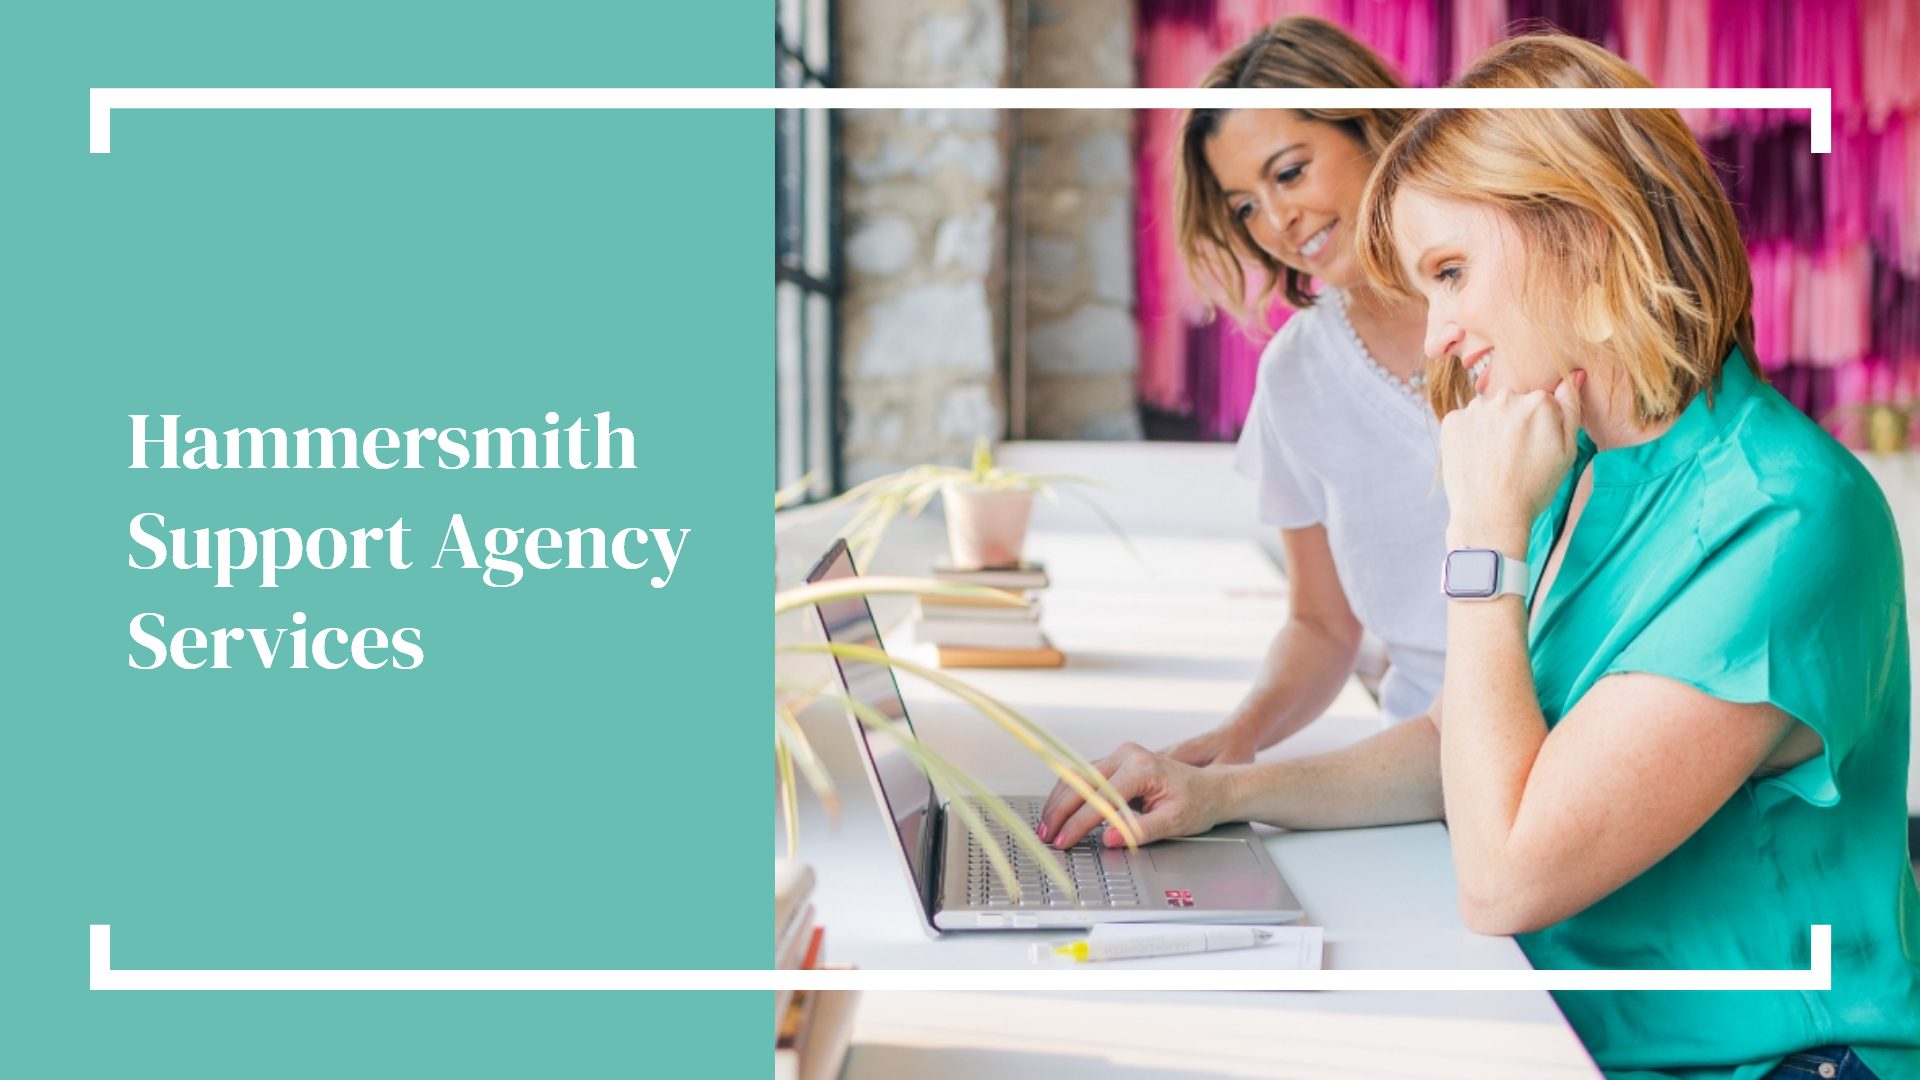 Hammersmith Support Agency Services